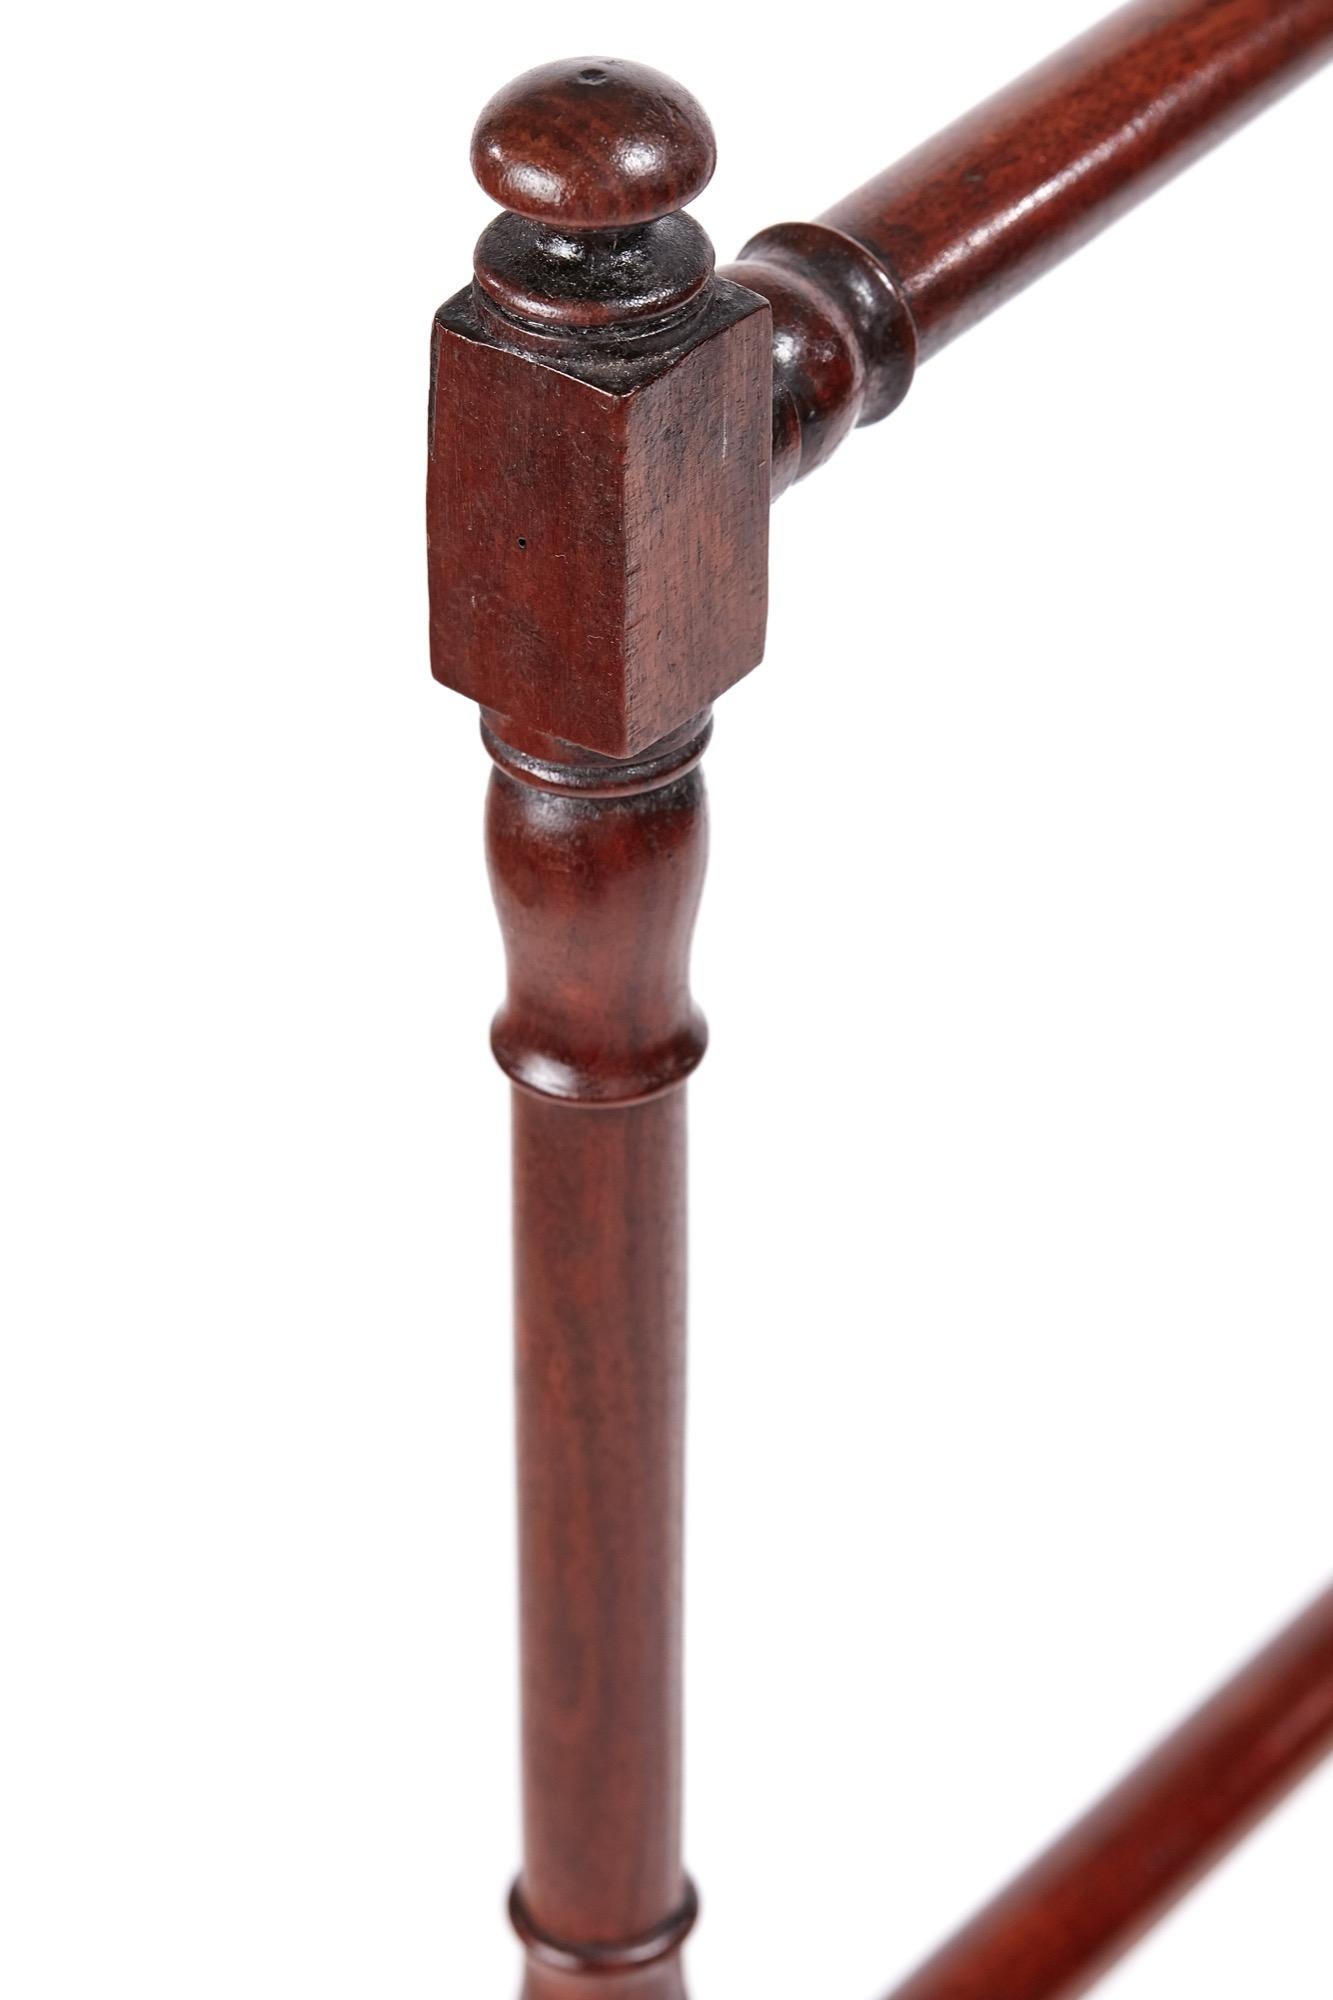 Unusual antique Victorian mahogany folding towel rail, lovely quality turned mahogany rails and supports, standing on small turned feet
Lovely color and condition
Measures: 30